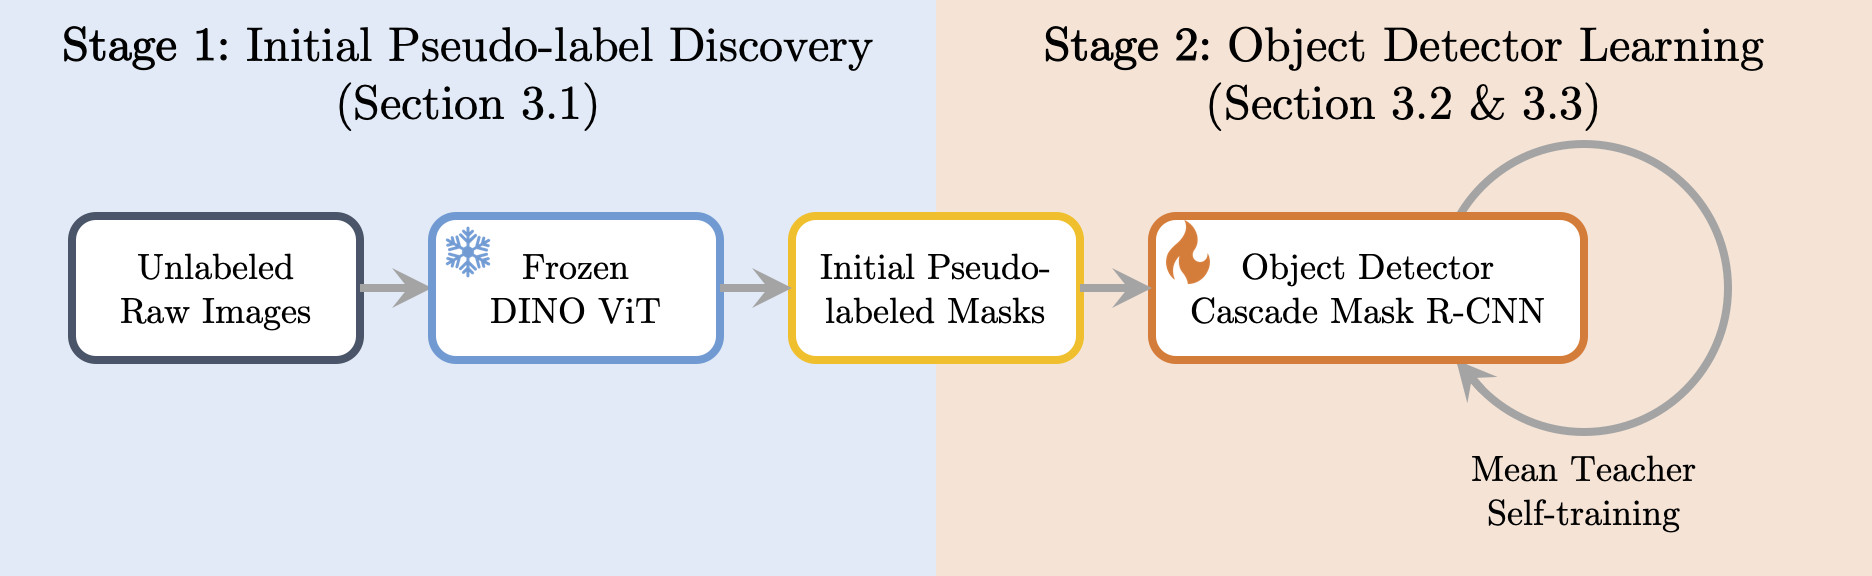 Two-Stage Discover-and-Learn Approach